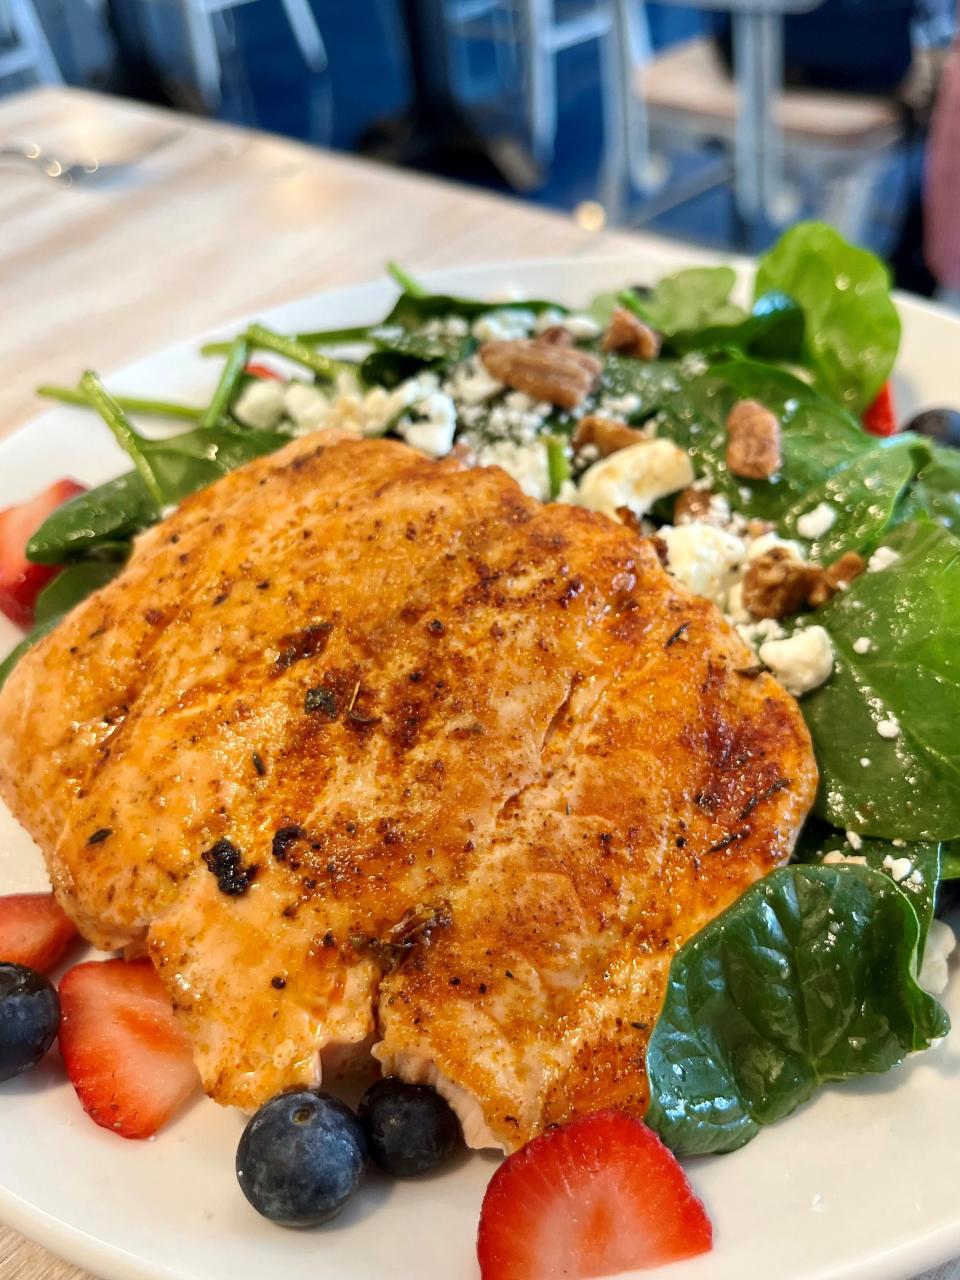 The strawberry zinfandel salad, pictured with grilled salmon added, is on the lunch and dinner menu at Wickies Lighthouse.